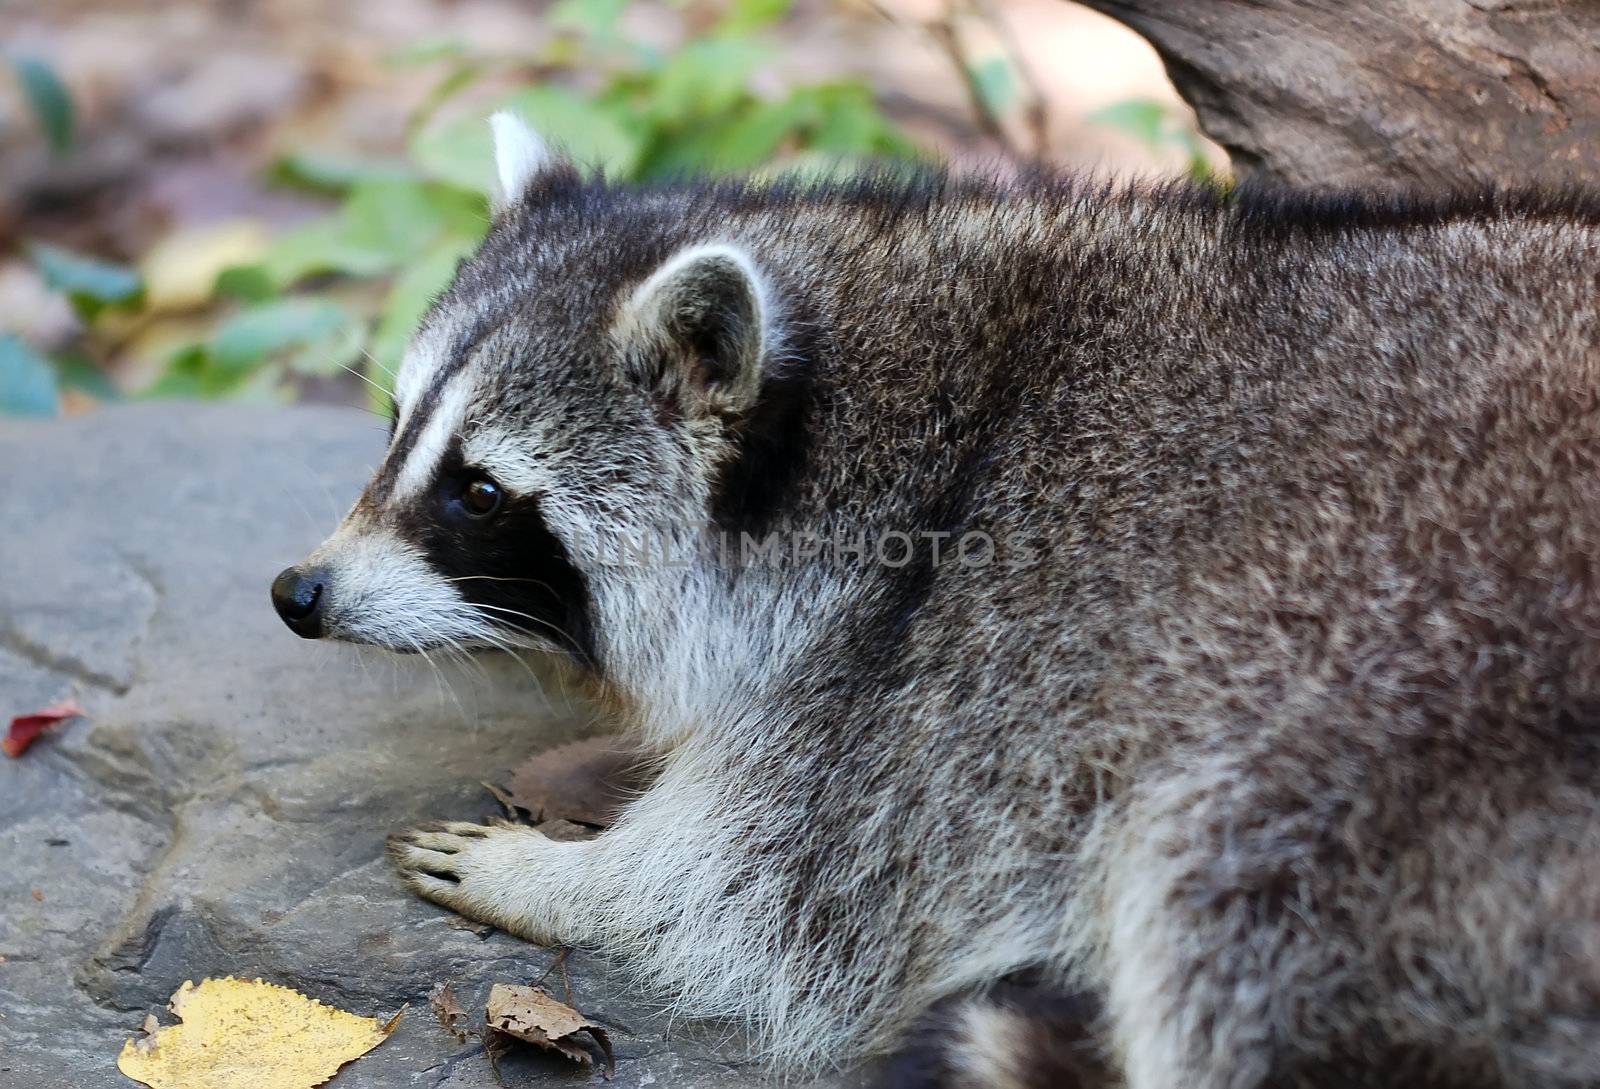 Portrait of a Common Raccoon (Procyon lotor) on a rock